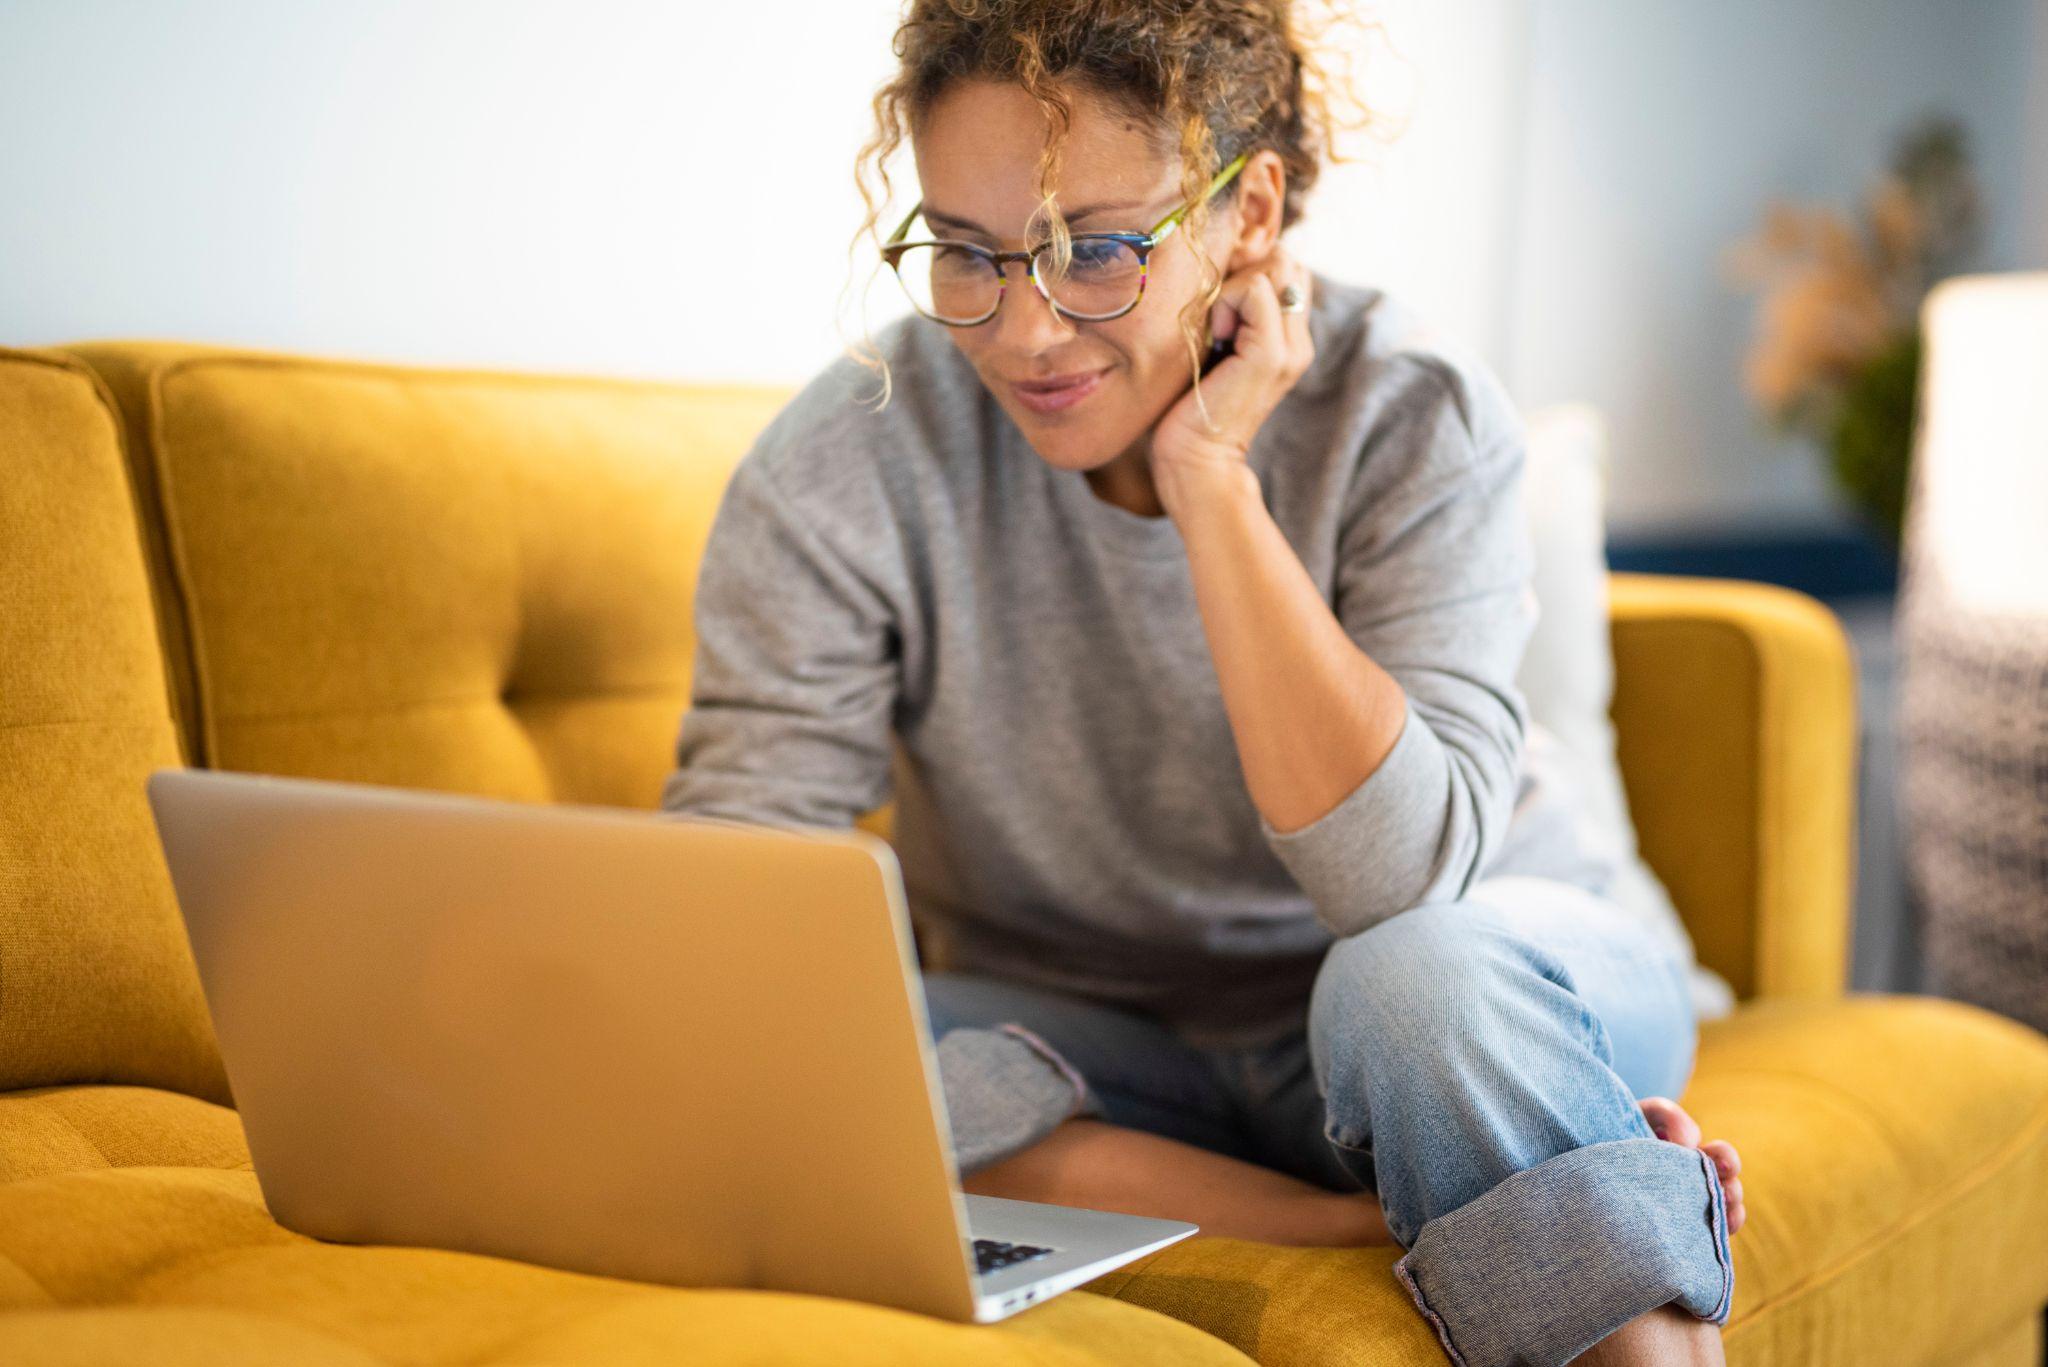 Female sitting on a yellow couch using laptop and internet connection and smile. 